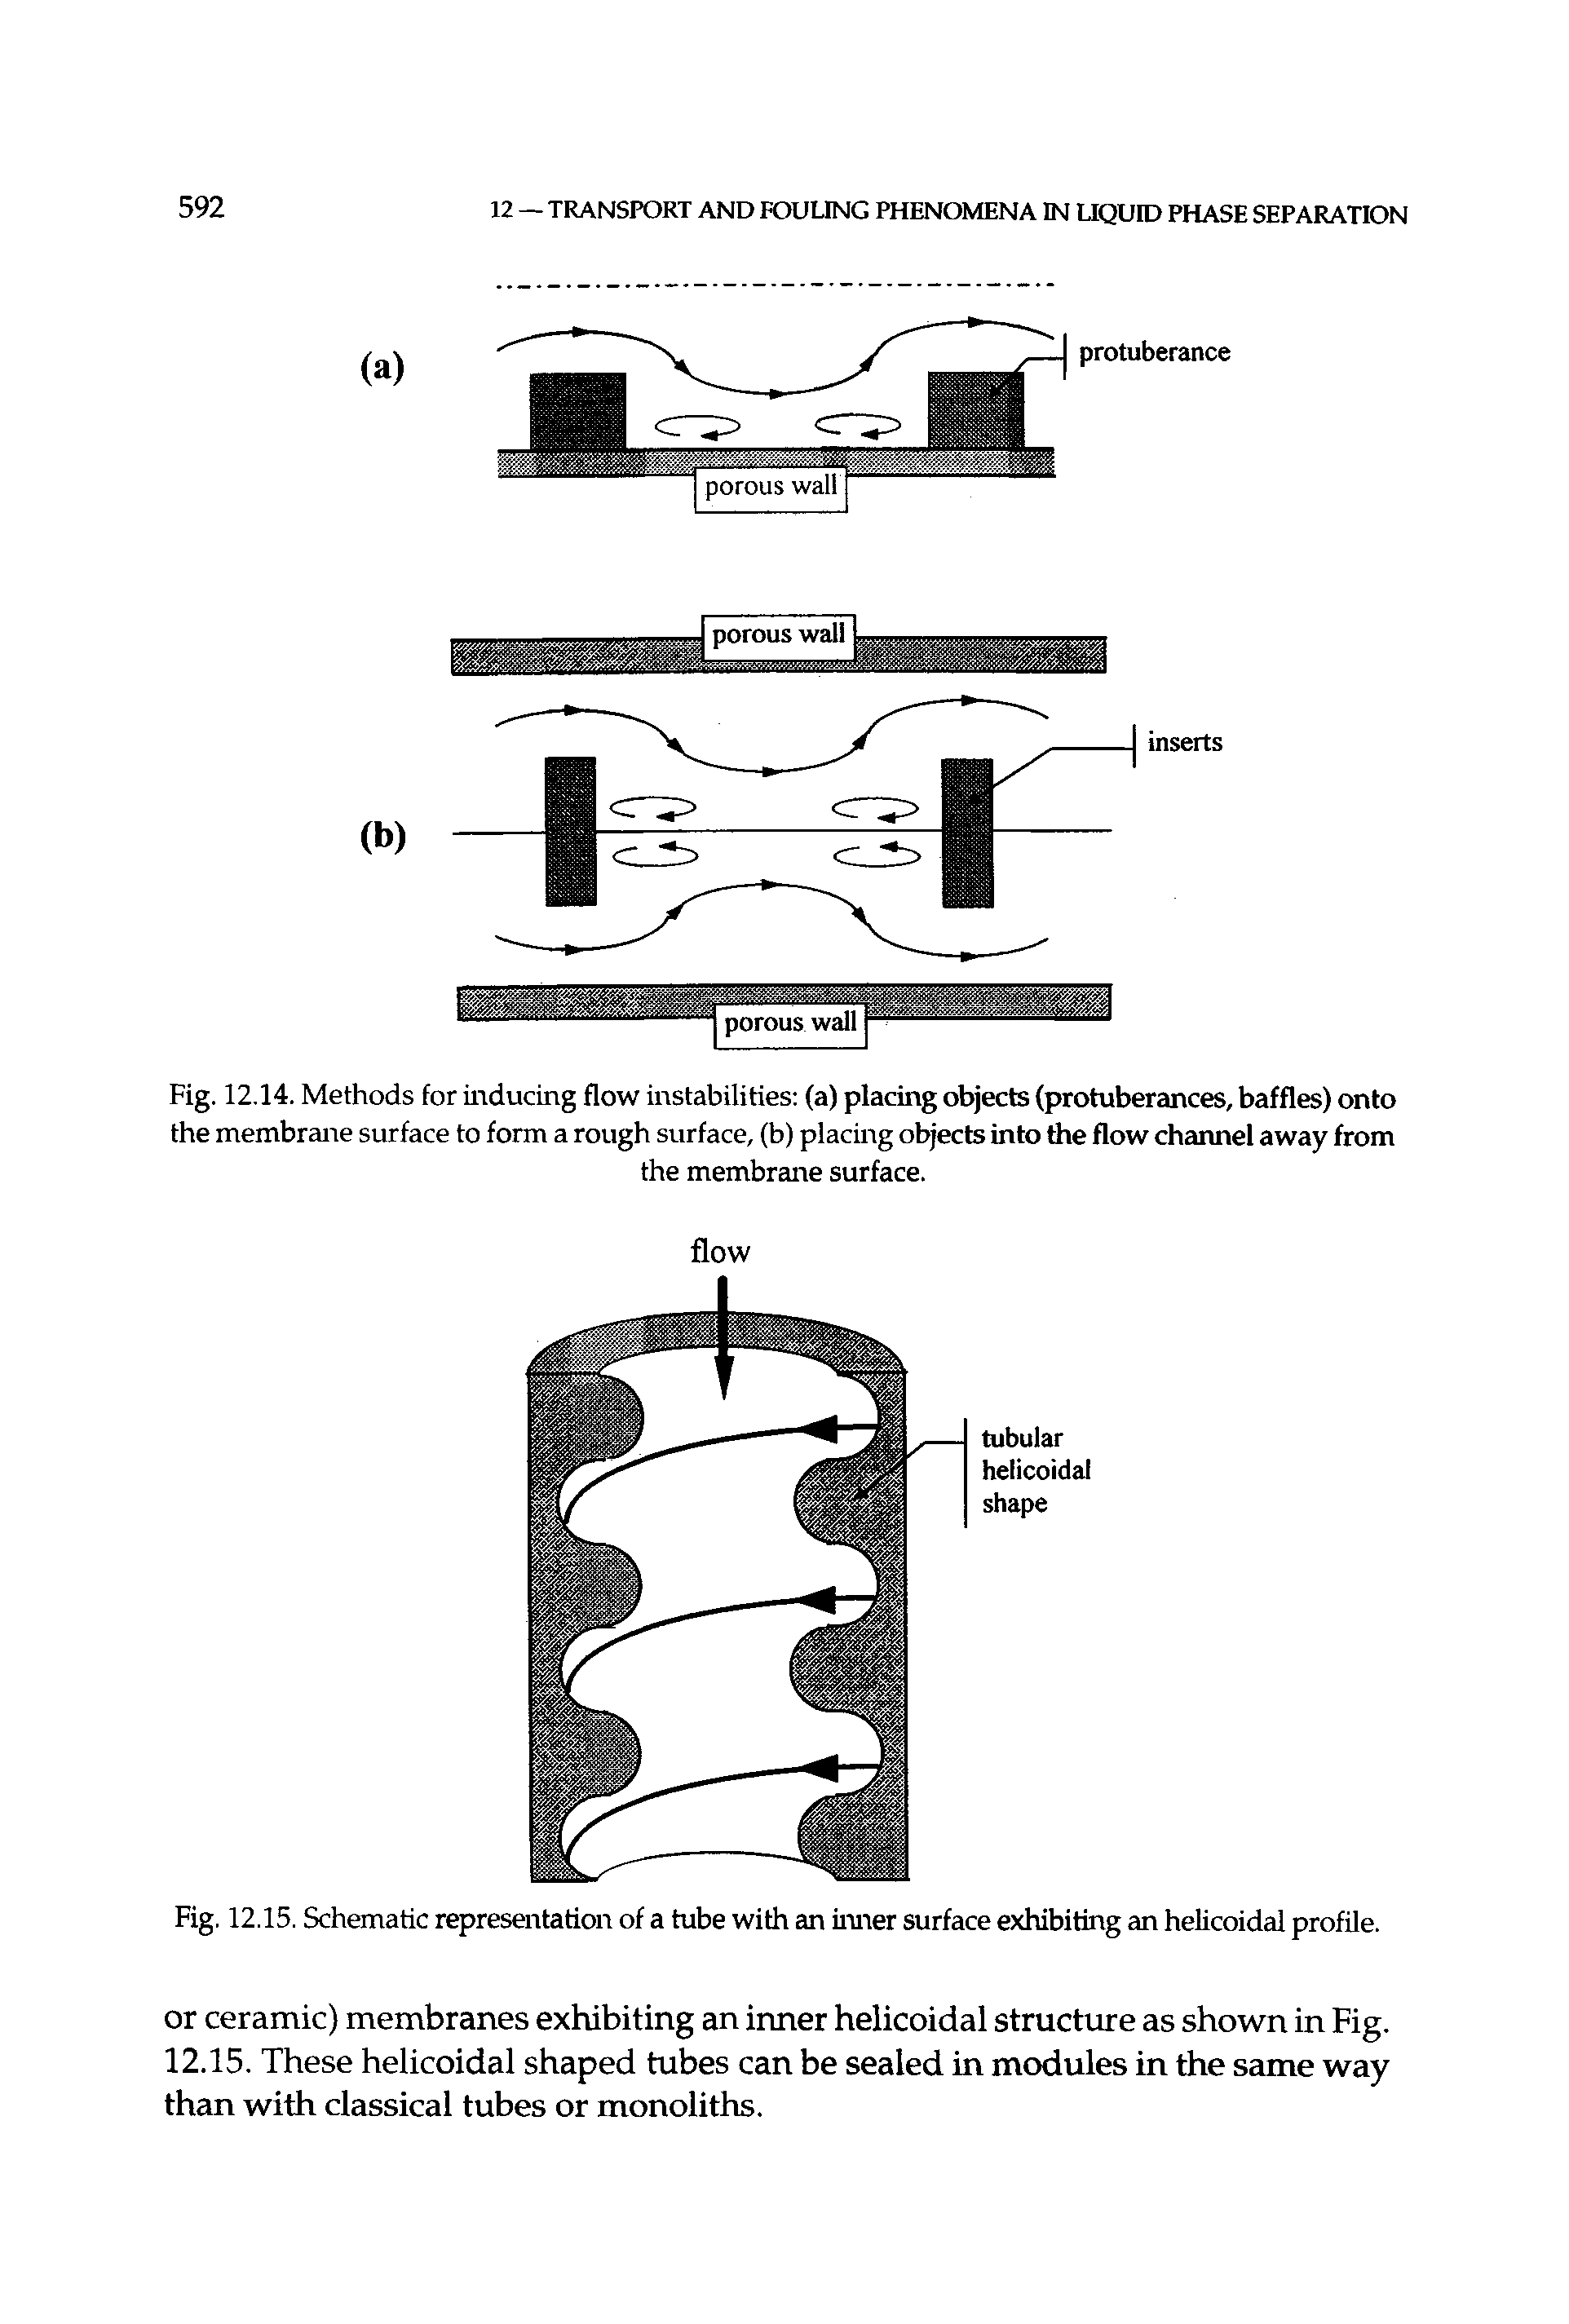 Fig. 12.14. Methods for inducing flow instabilities (a) placing objects (protuberances, baffles) onto the membrane surface to form a rough surface, (b) placing objects into the flow channel away from...